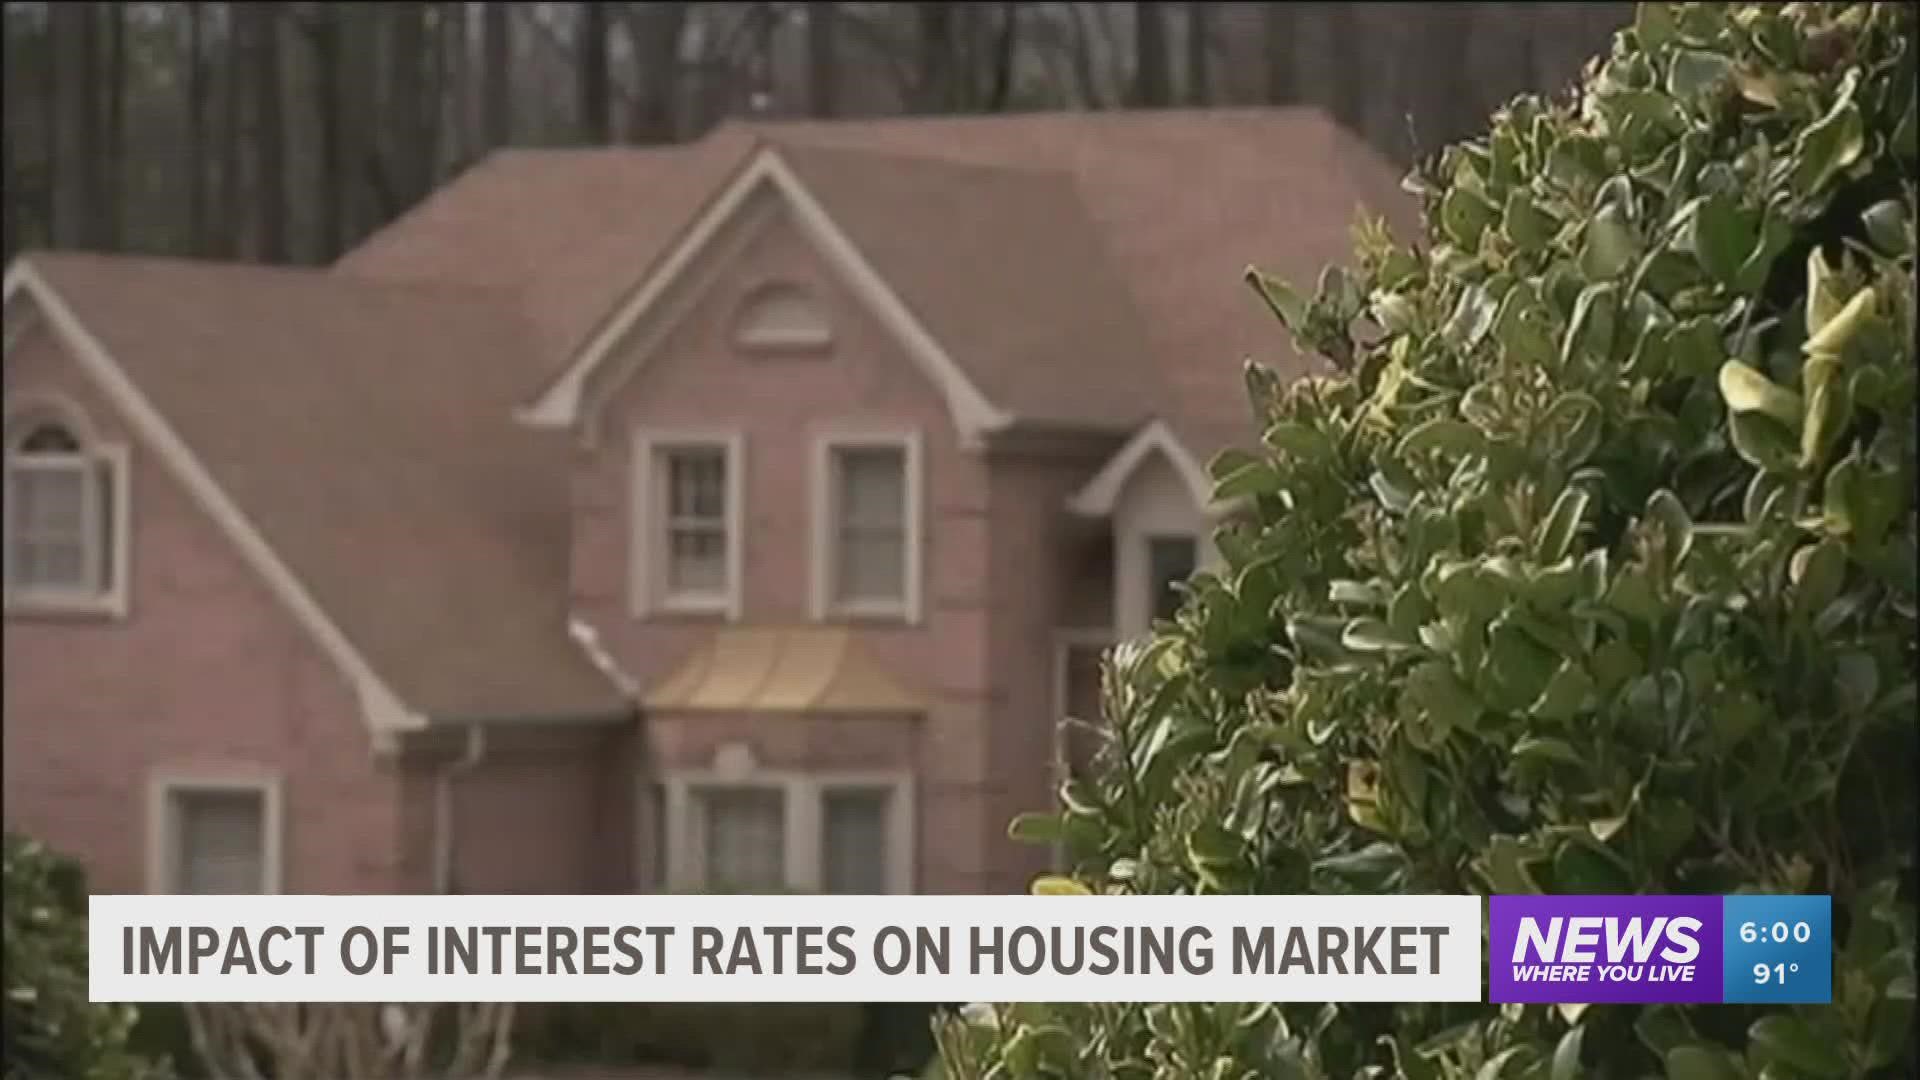 The skyrocketing interest rates are putting home buyers in a tough spot with some experts predicting interest rates in the double digits.